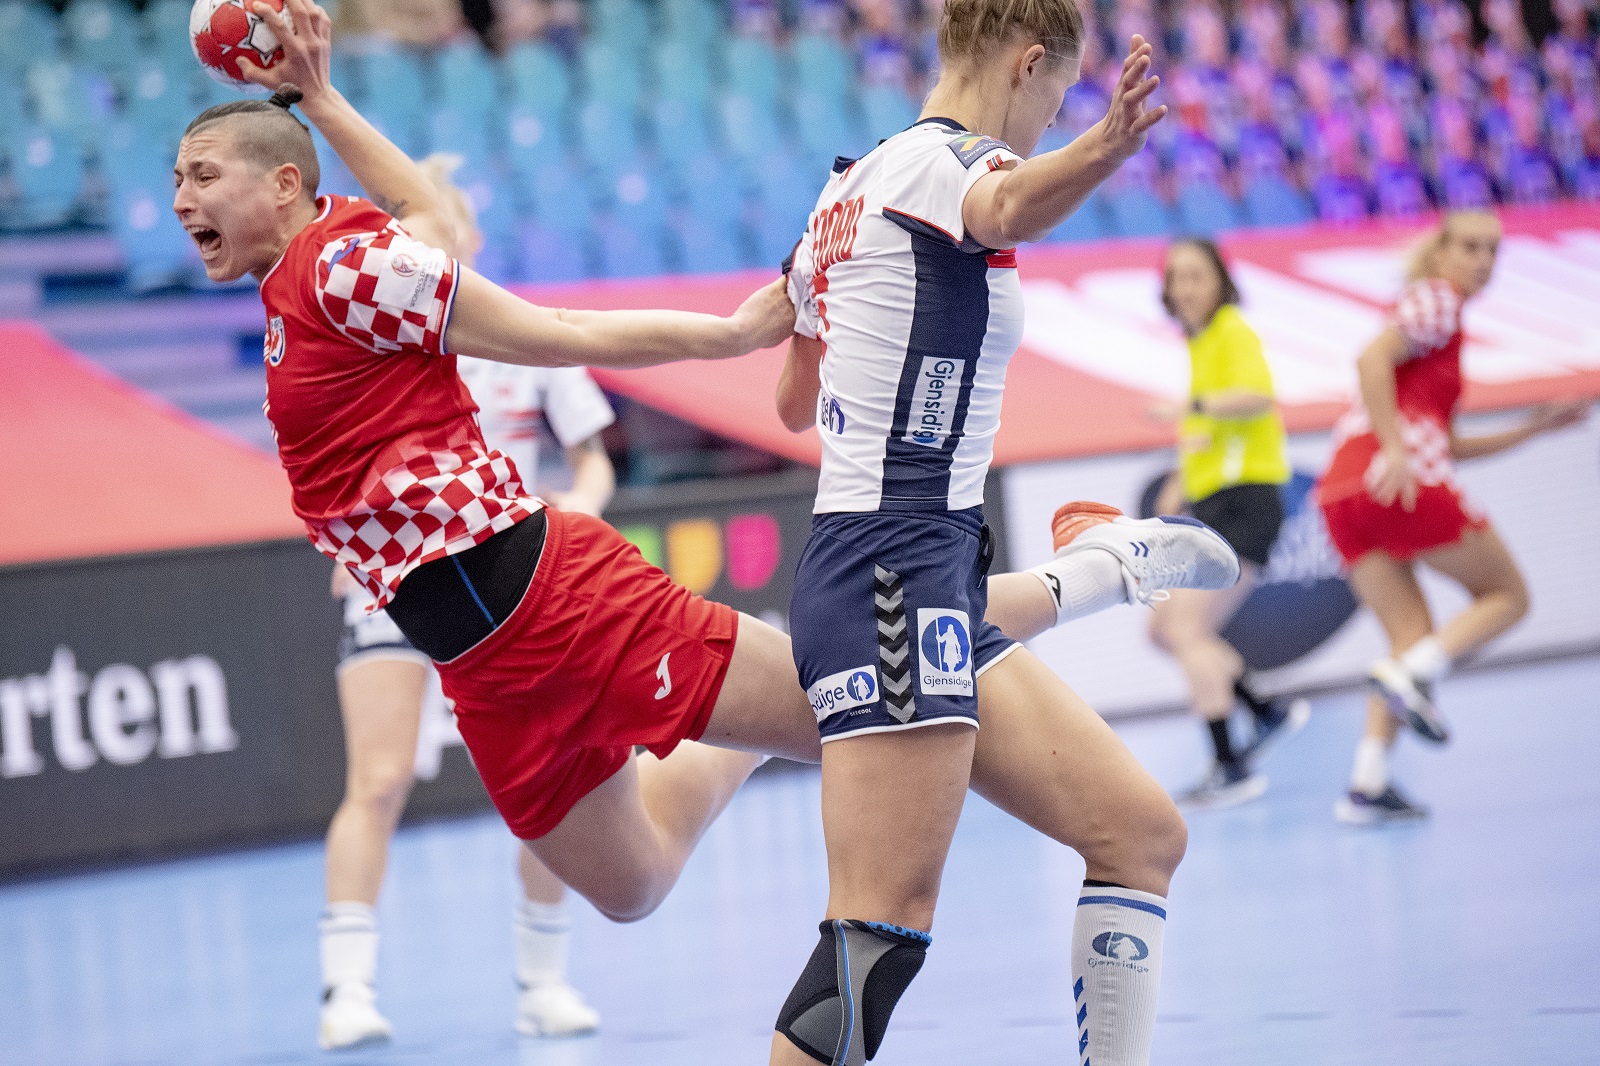 epa08879964 Katarina Jezic (L) of Croatia in action with Marit Malm Frafjord of Norway during the EHF EURO 2020 European Women's Handball Main Round - Group II match between Croatia and Norway at Sydbank Arena in Kolding, Denmark, 12 December 2020.  EPA/Bo Amstrup  DENMARK OUT